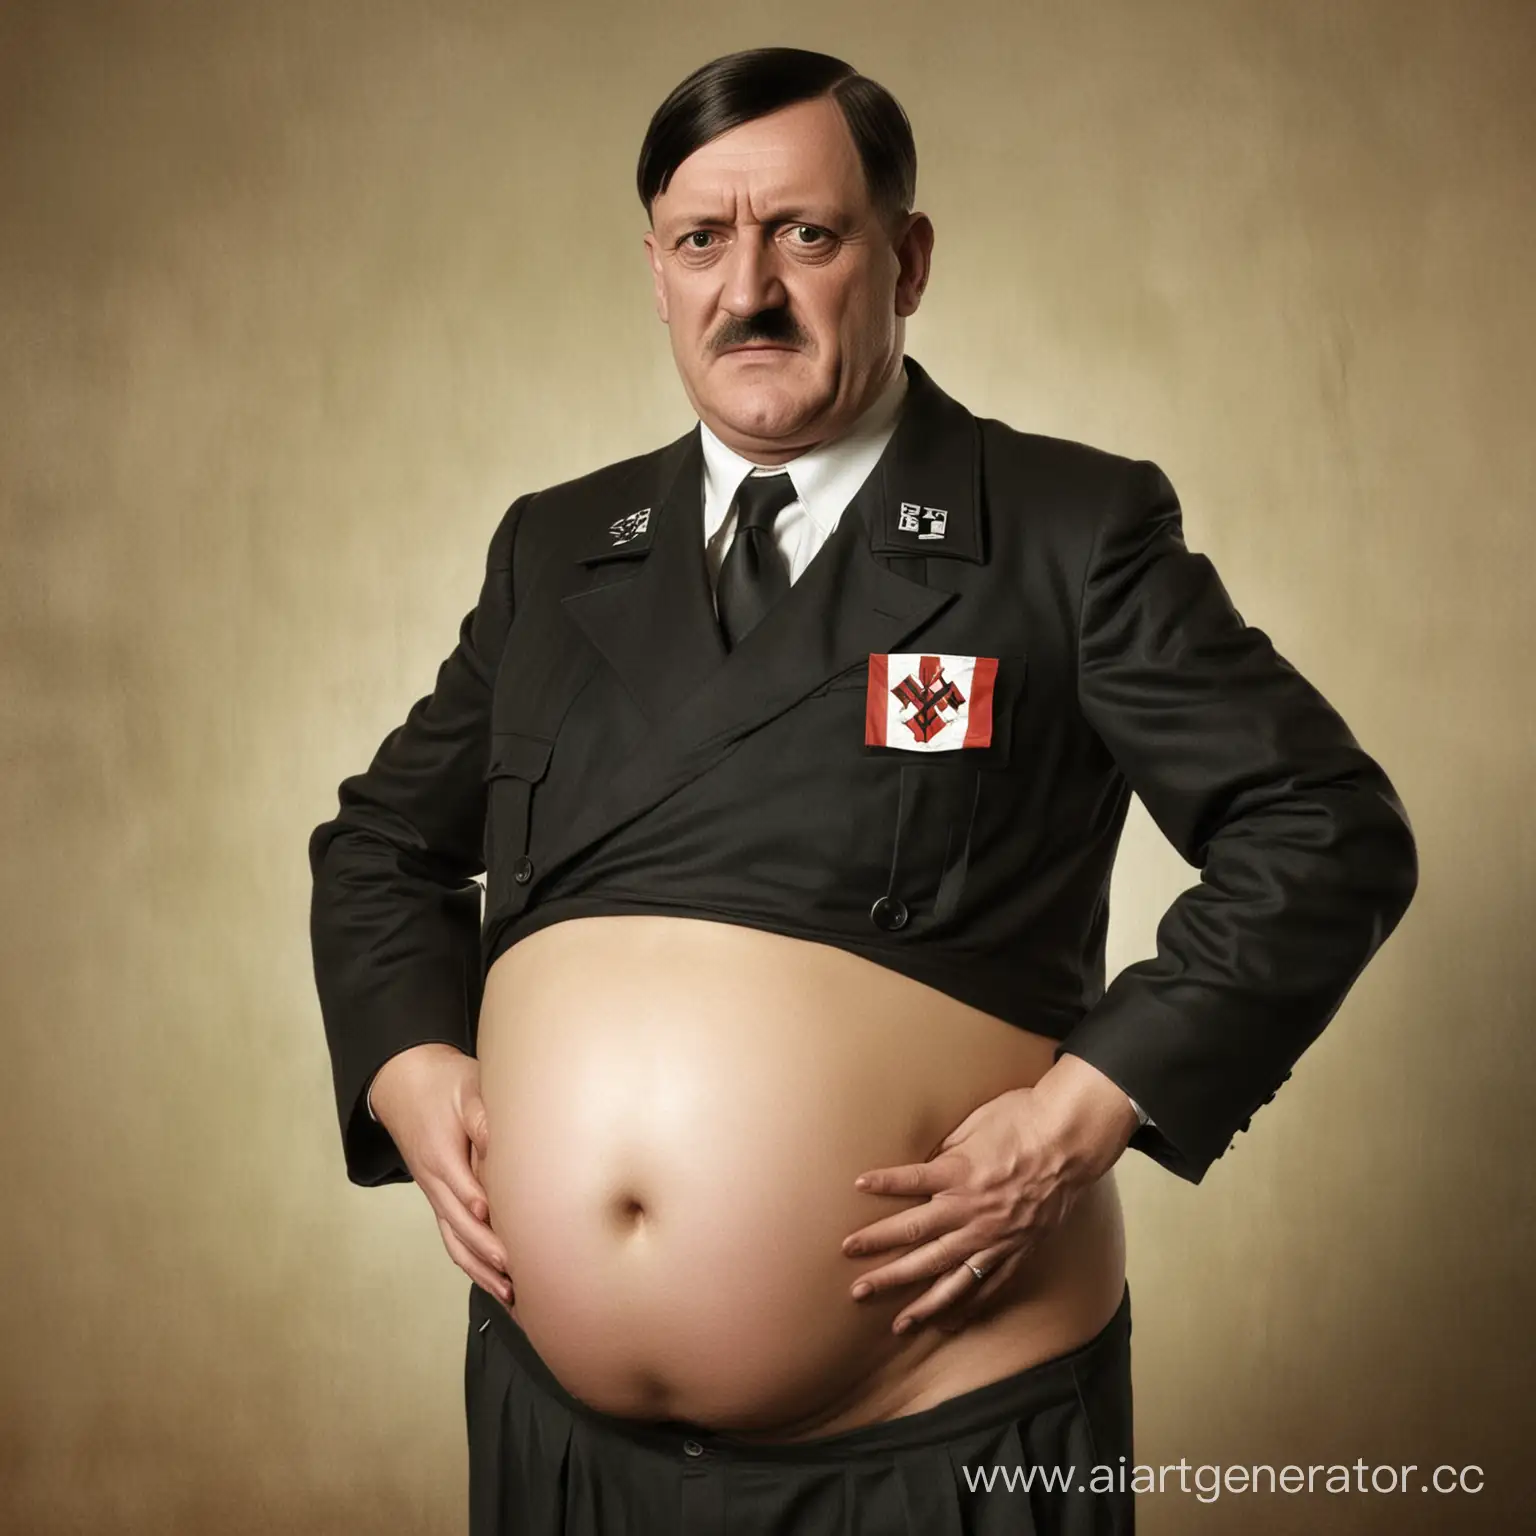 Controversial-Concept-Art-Pregnant-Hitler-Portrayed-in-Surrealistic-Style